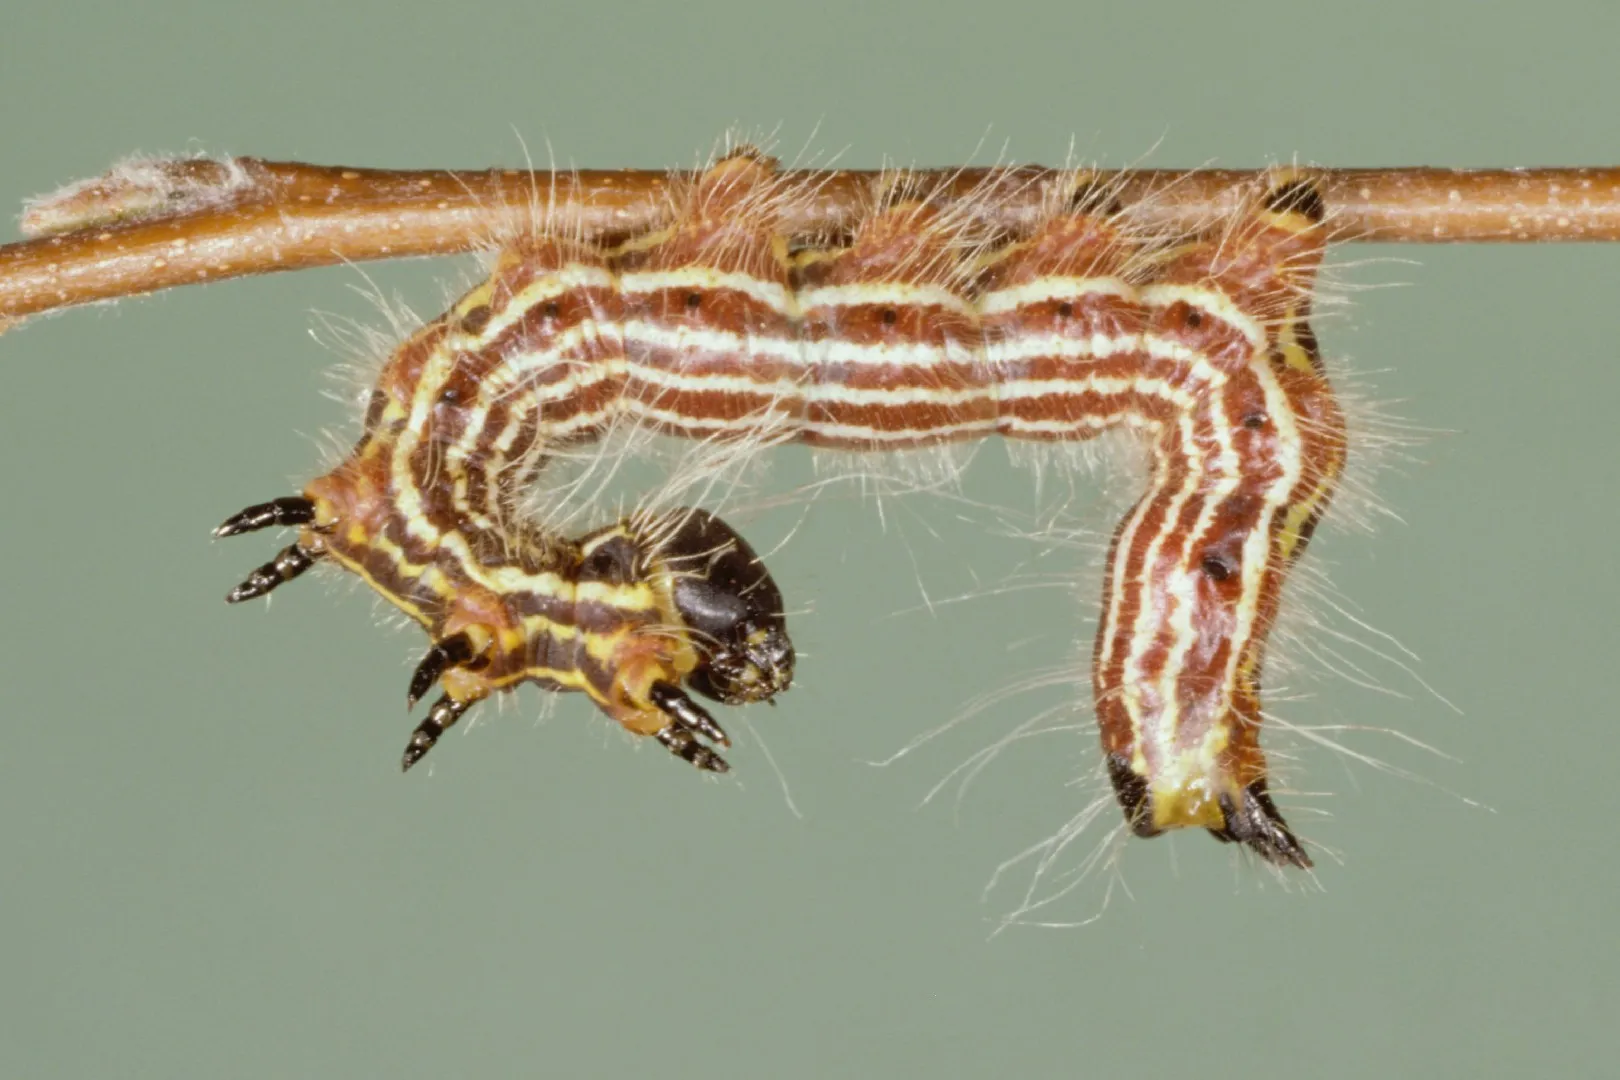 A caterpillar crawling on a branch, possibly a Yellownecked Caterpillar.